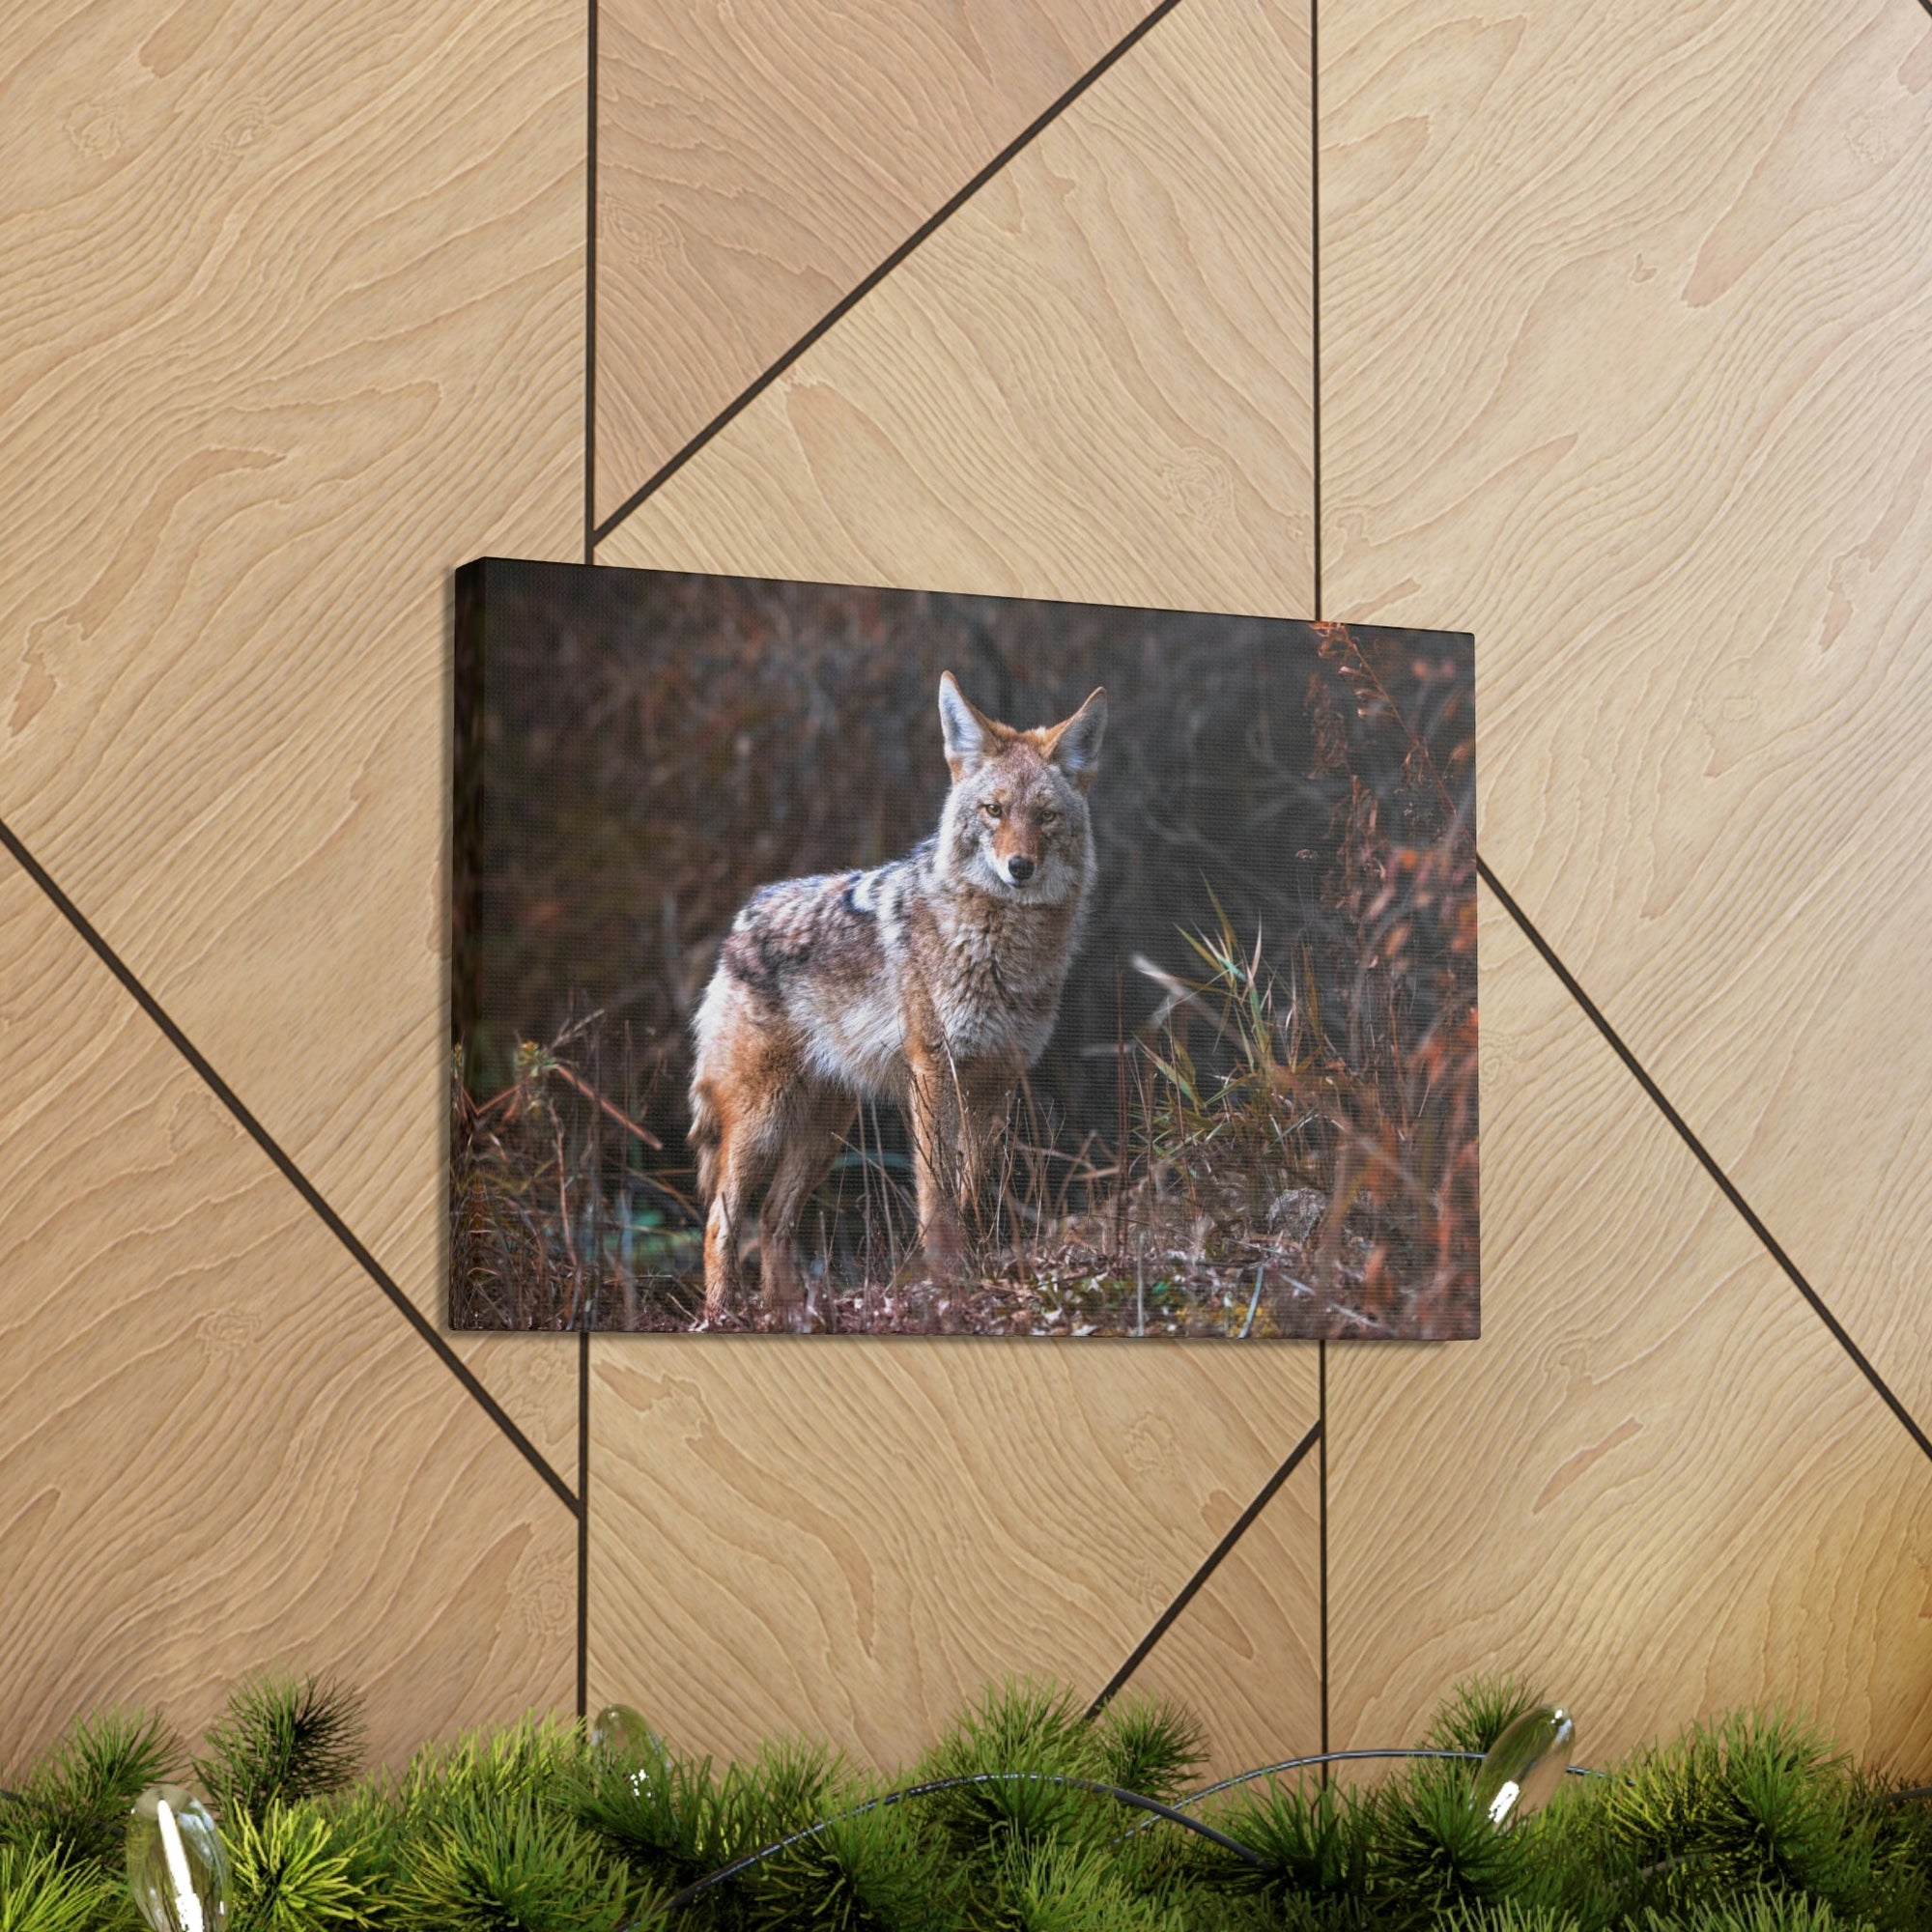 Scripture Walls Majestic Coyote Art Majestic Coyote Print Animal Wall Art Wildlife Canvas Prints Wall Art Ready to Hang Unframed-Express Your Love Gifts